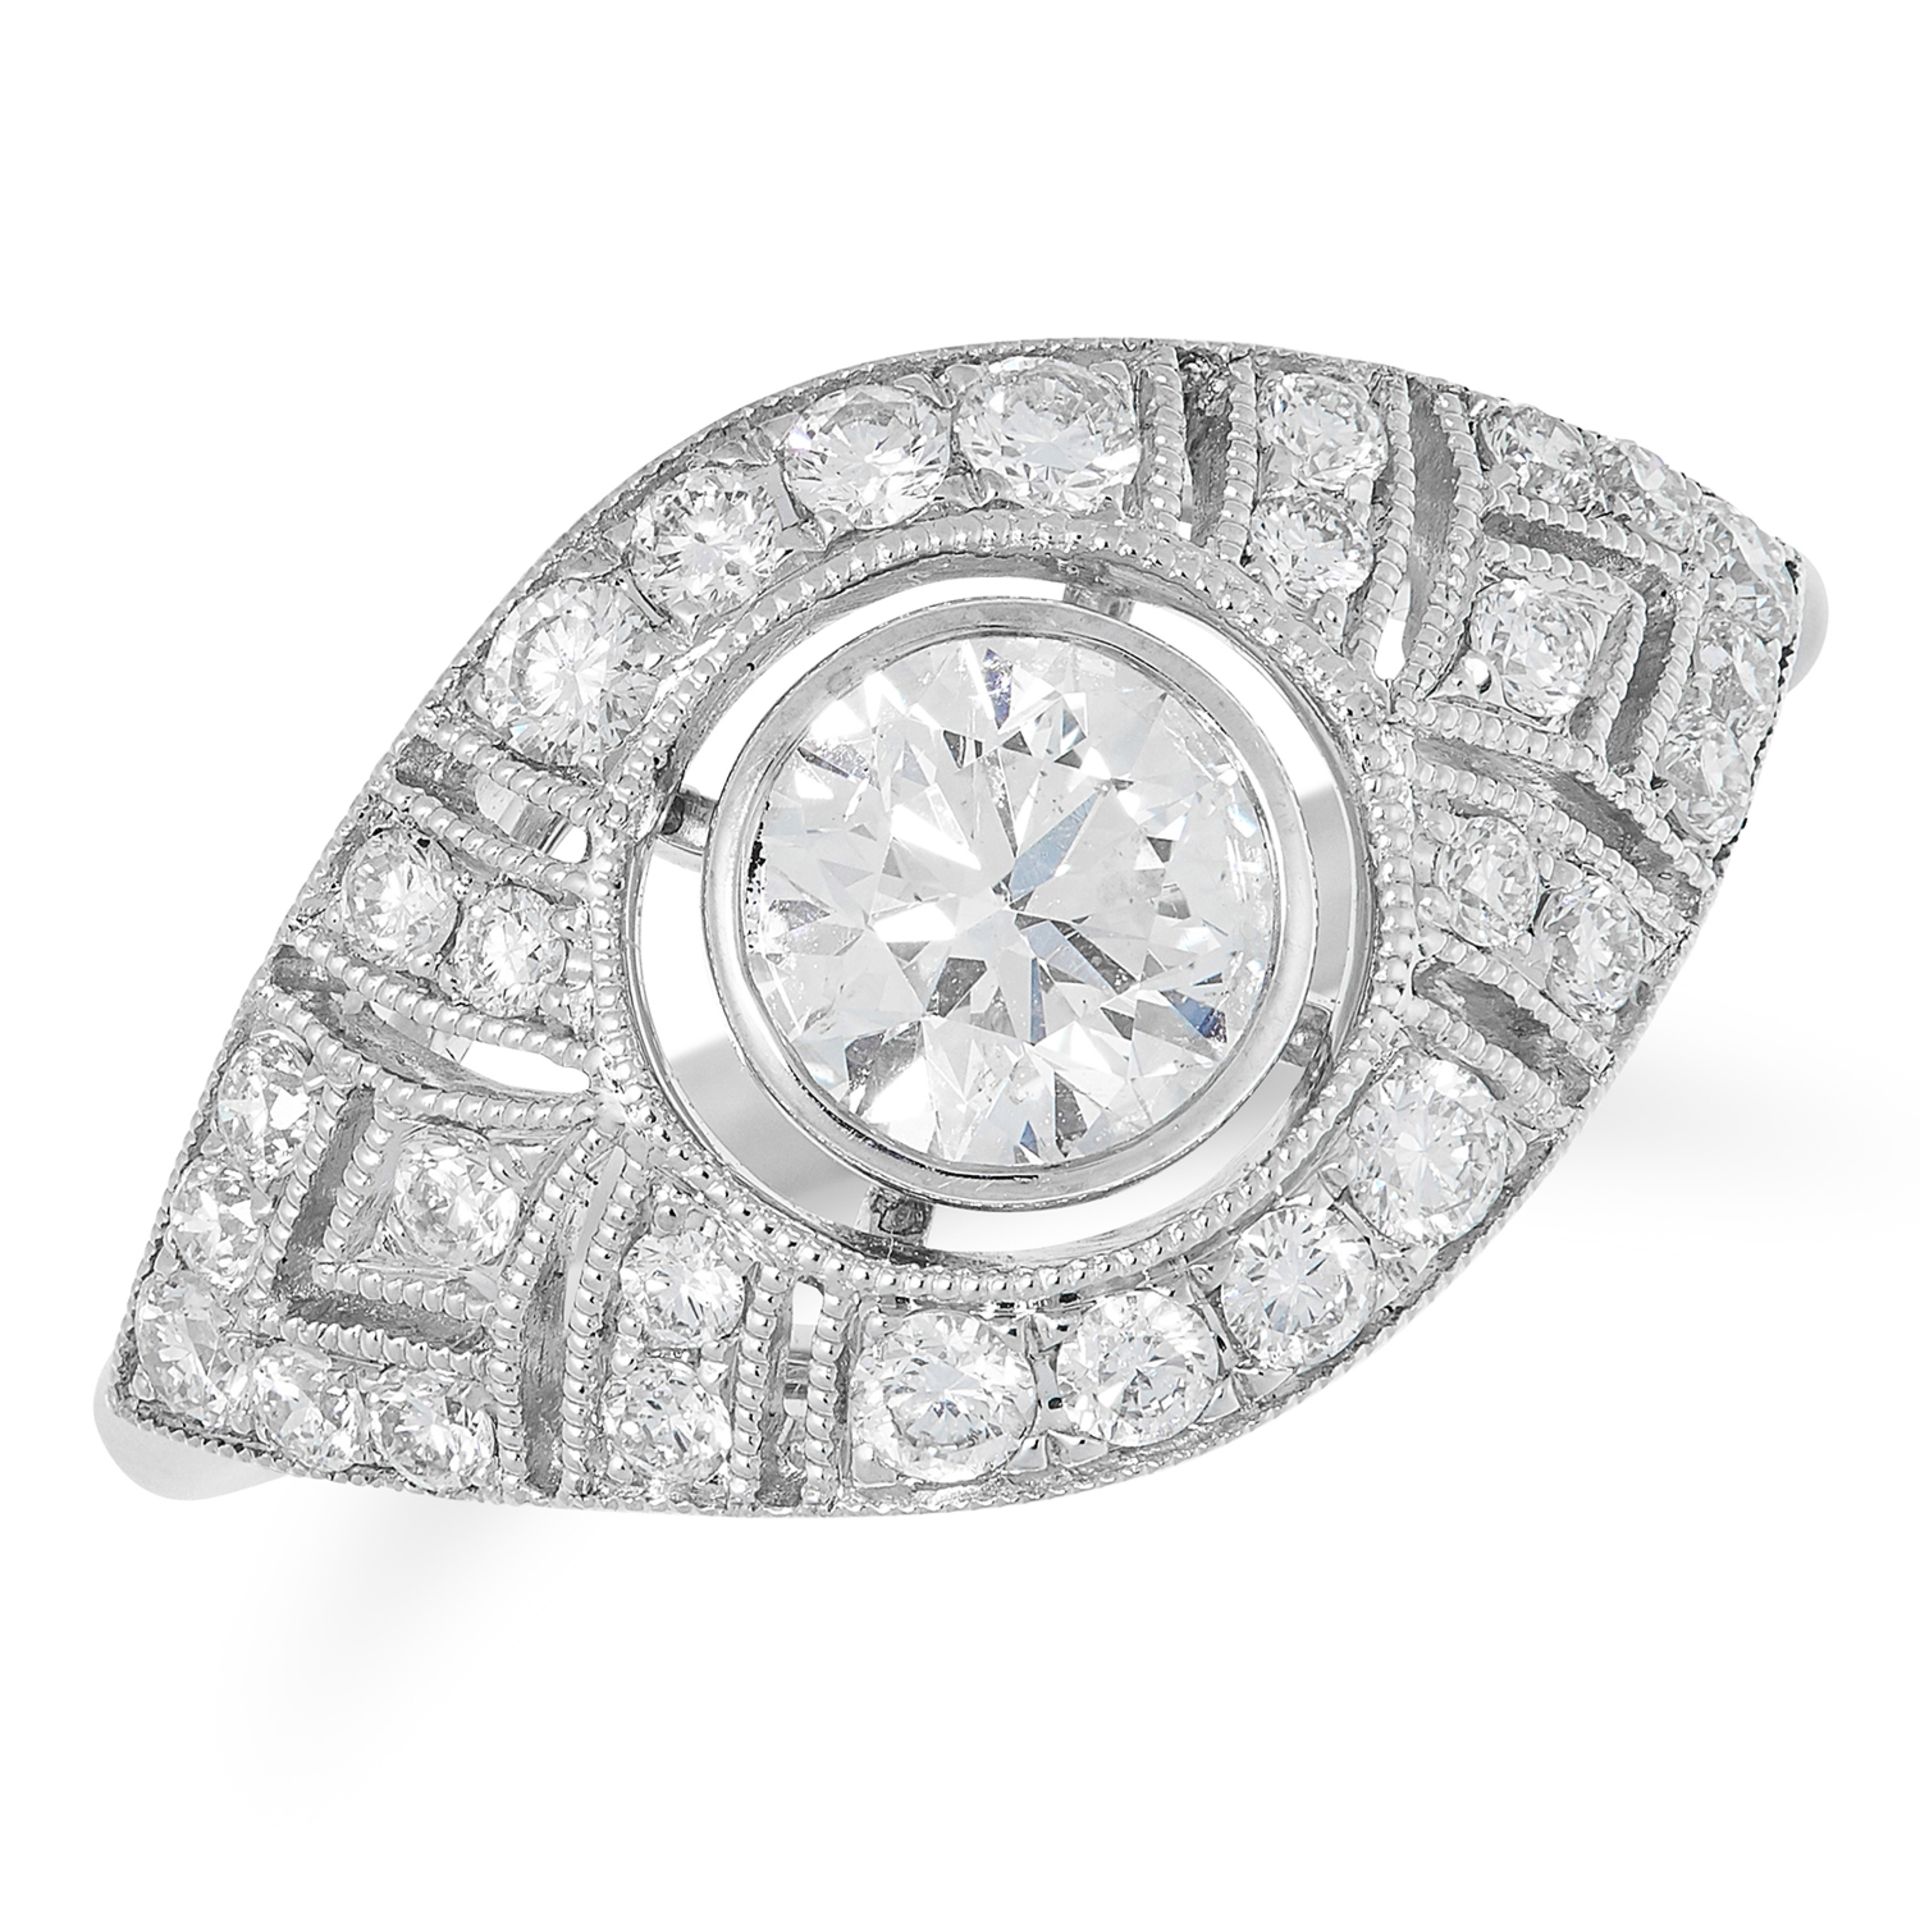 A DIAMOND DRESS RING in Art Deco style, set with a central round cut diamond of 0.65 carats, the